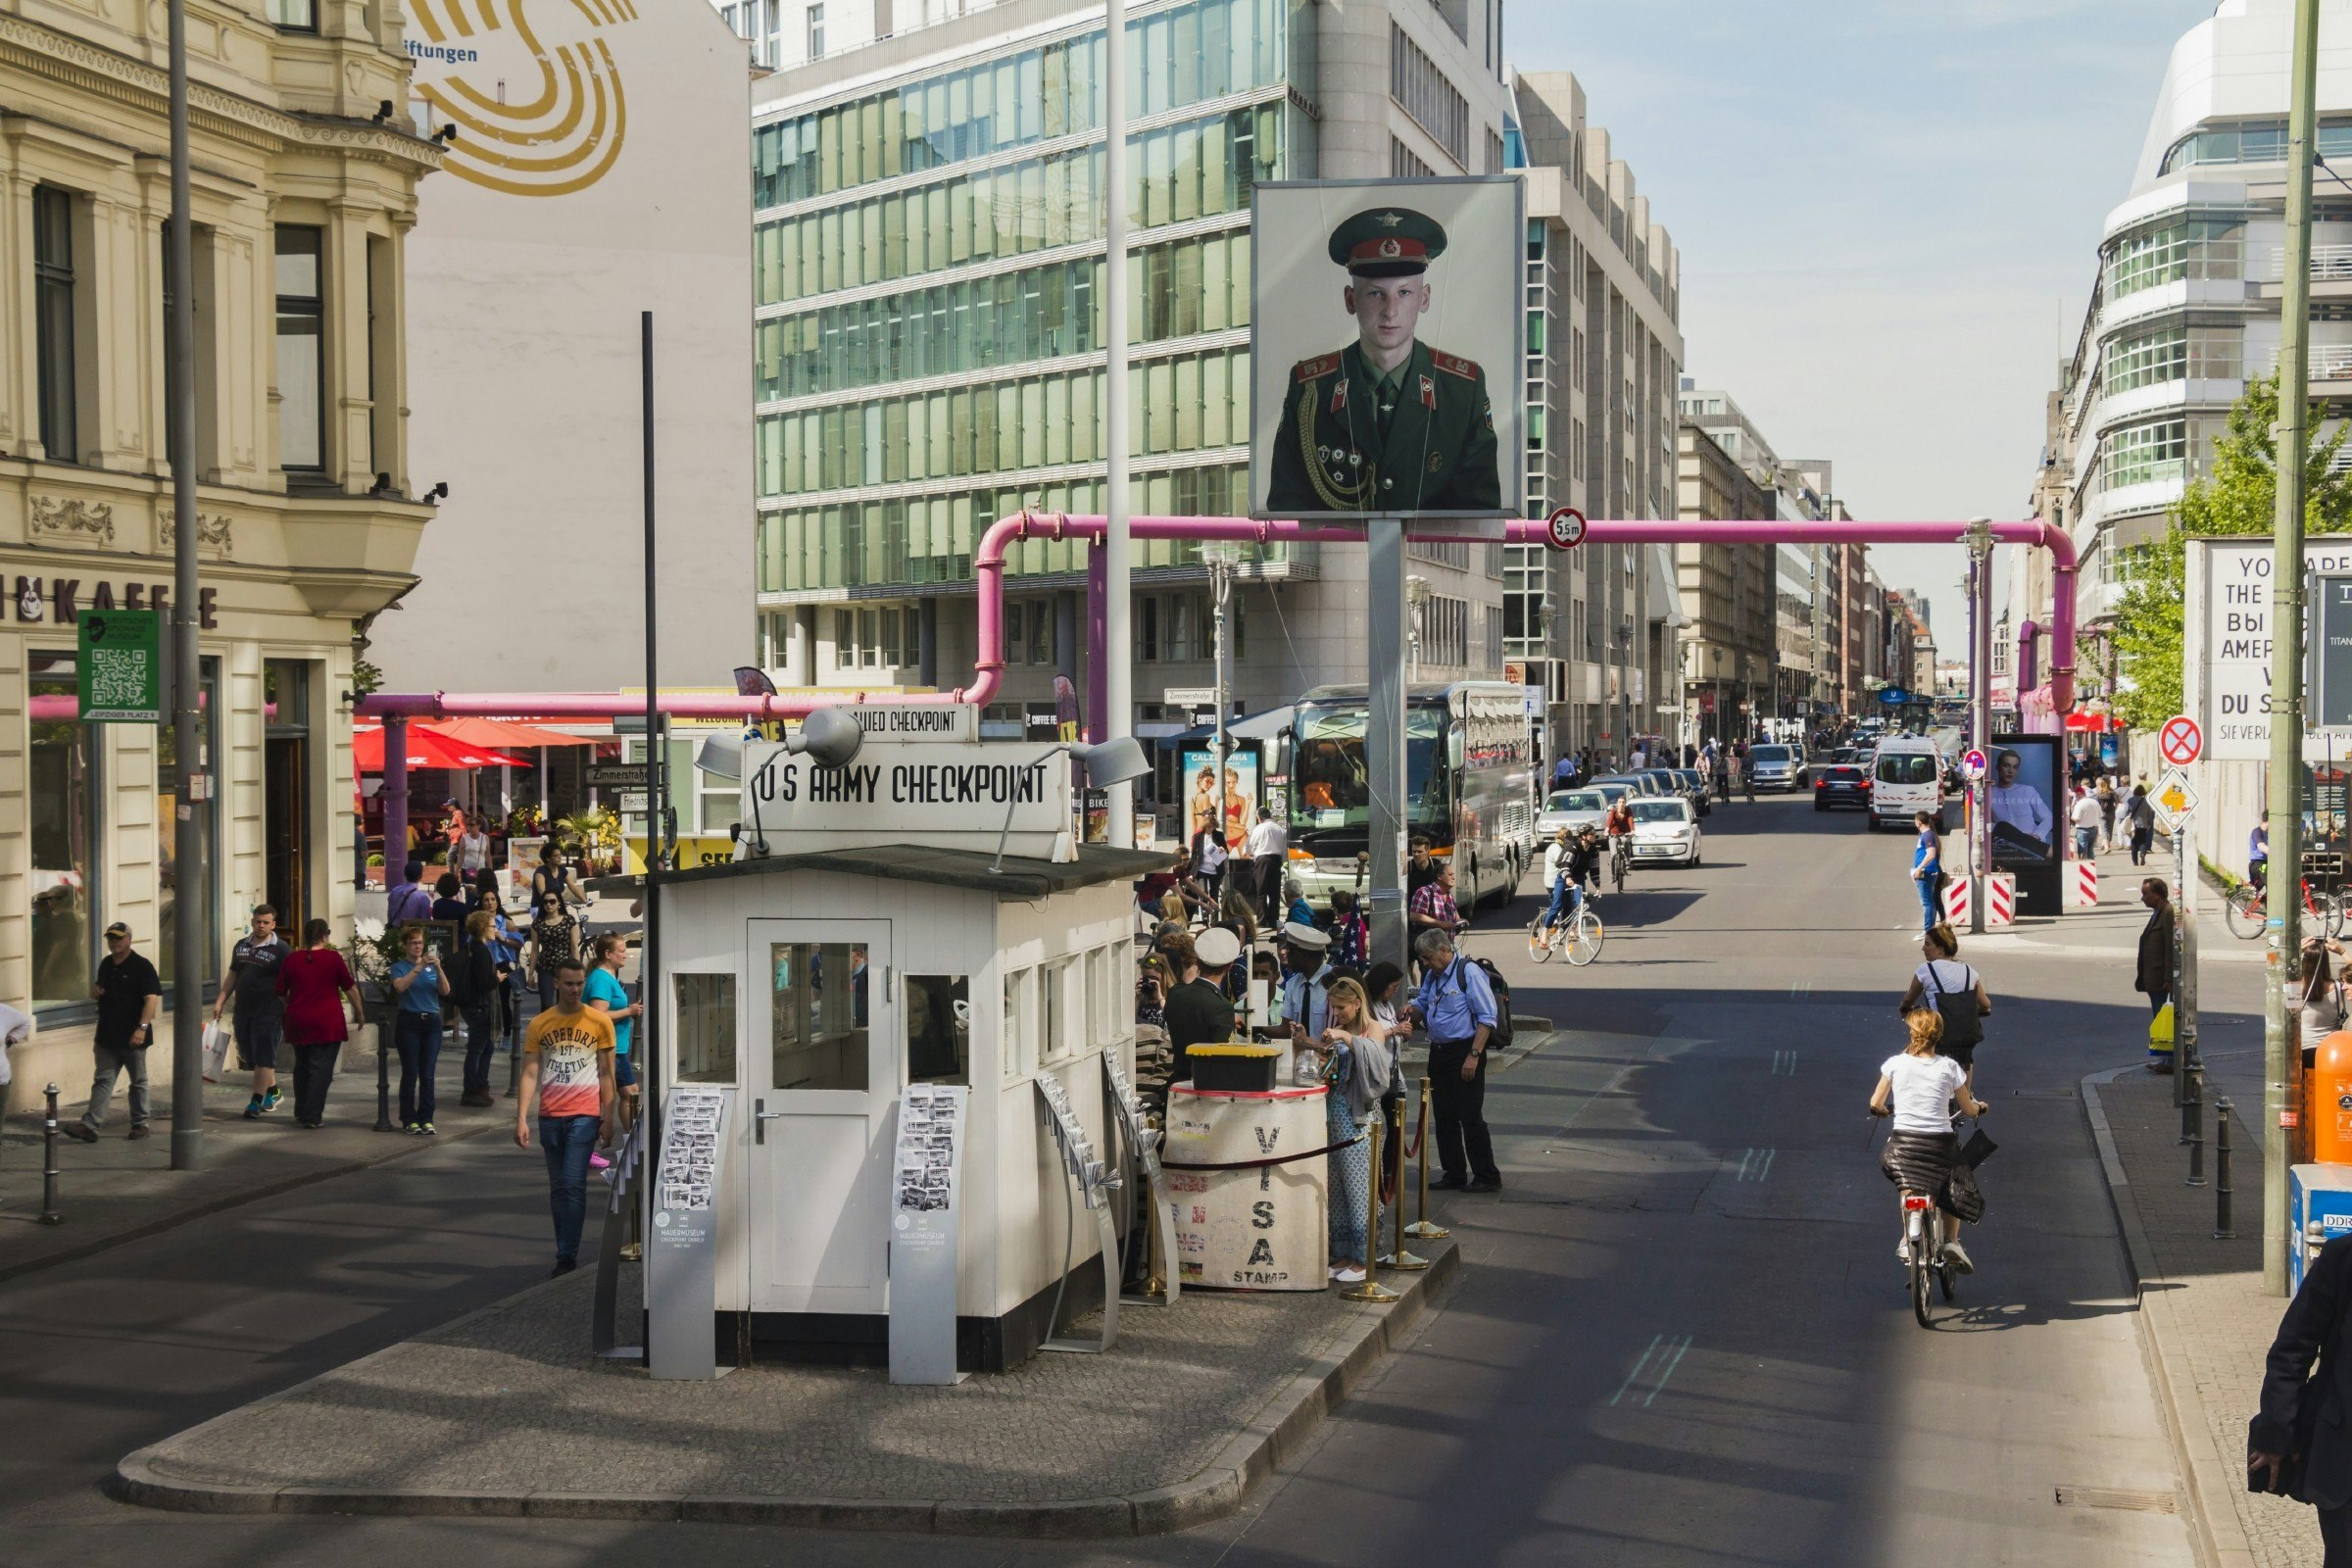 A crowd of people at Checkpoint Charlie, the former Berlin Wall border crossing point between East and West Berlin.